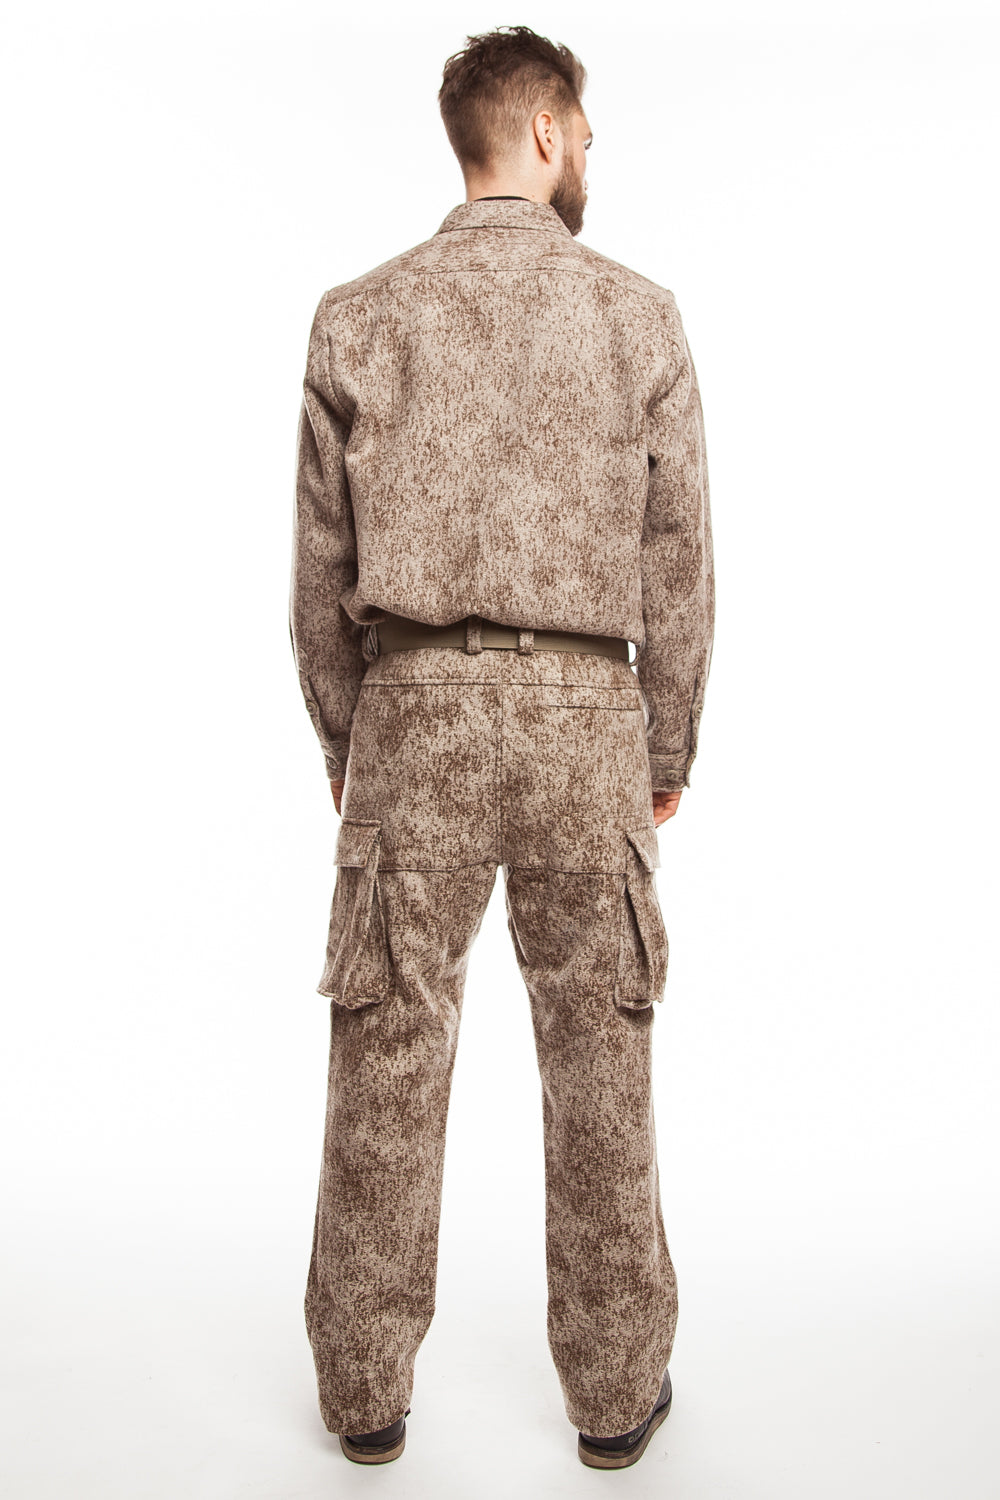 Mossy Oak Obsession Men's Stretch Cargo Turkey Hunting Pant, up to Size 2XL  - Walmart.com